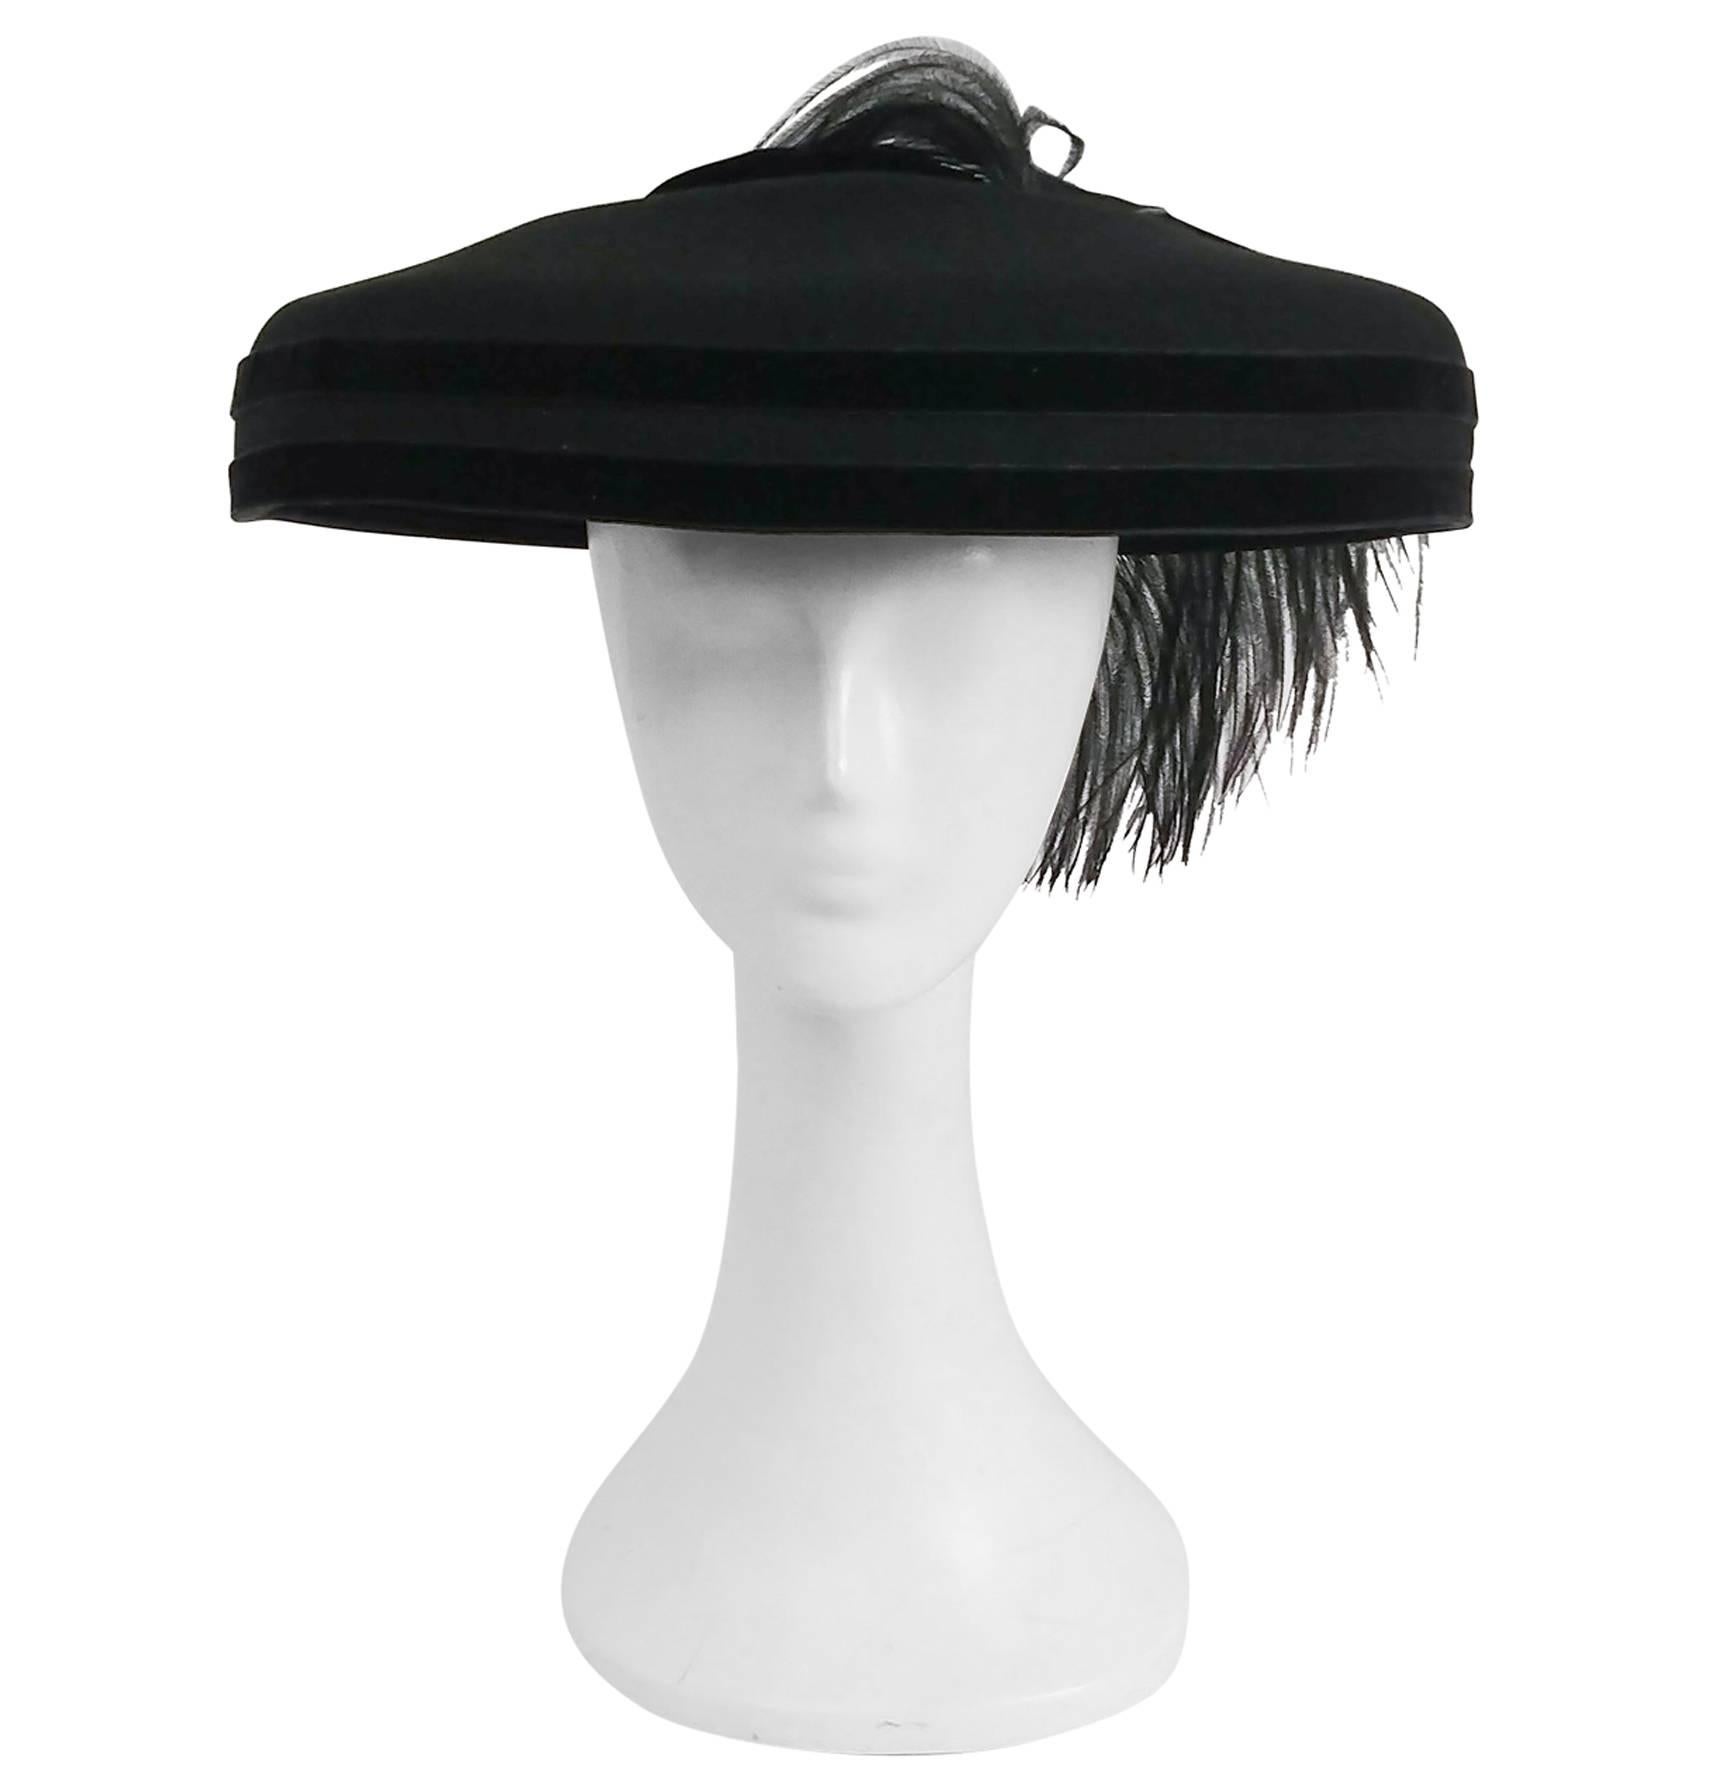 1980s Black Wool Wide Brimmed Hat w/ Feather